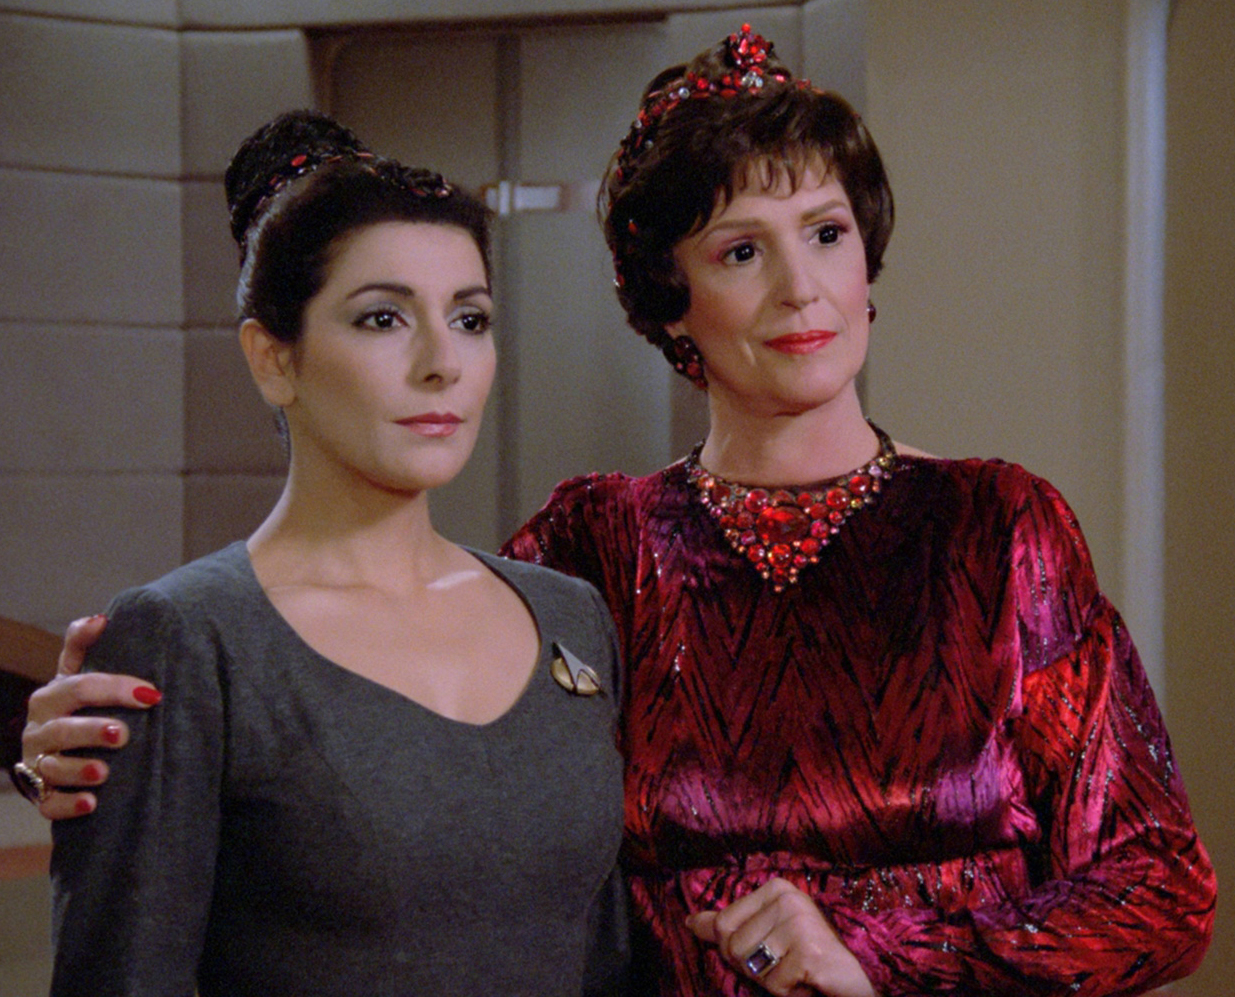 A Mother-Daughter Bond – The Overlooked ‘Star Trek: The Next Generation’ Relationship